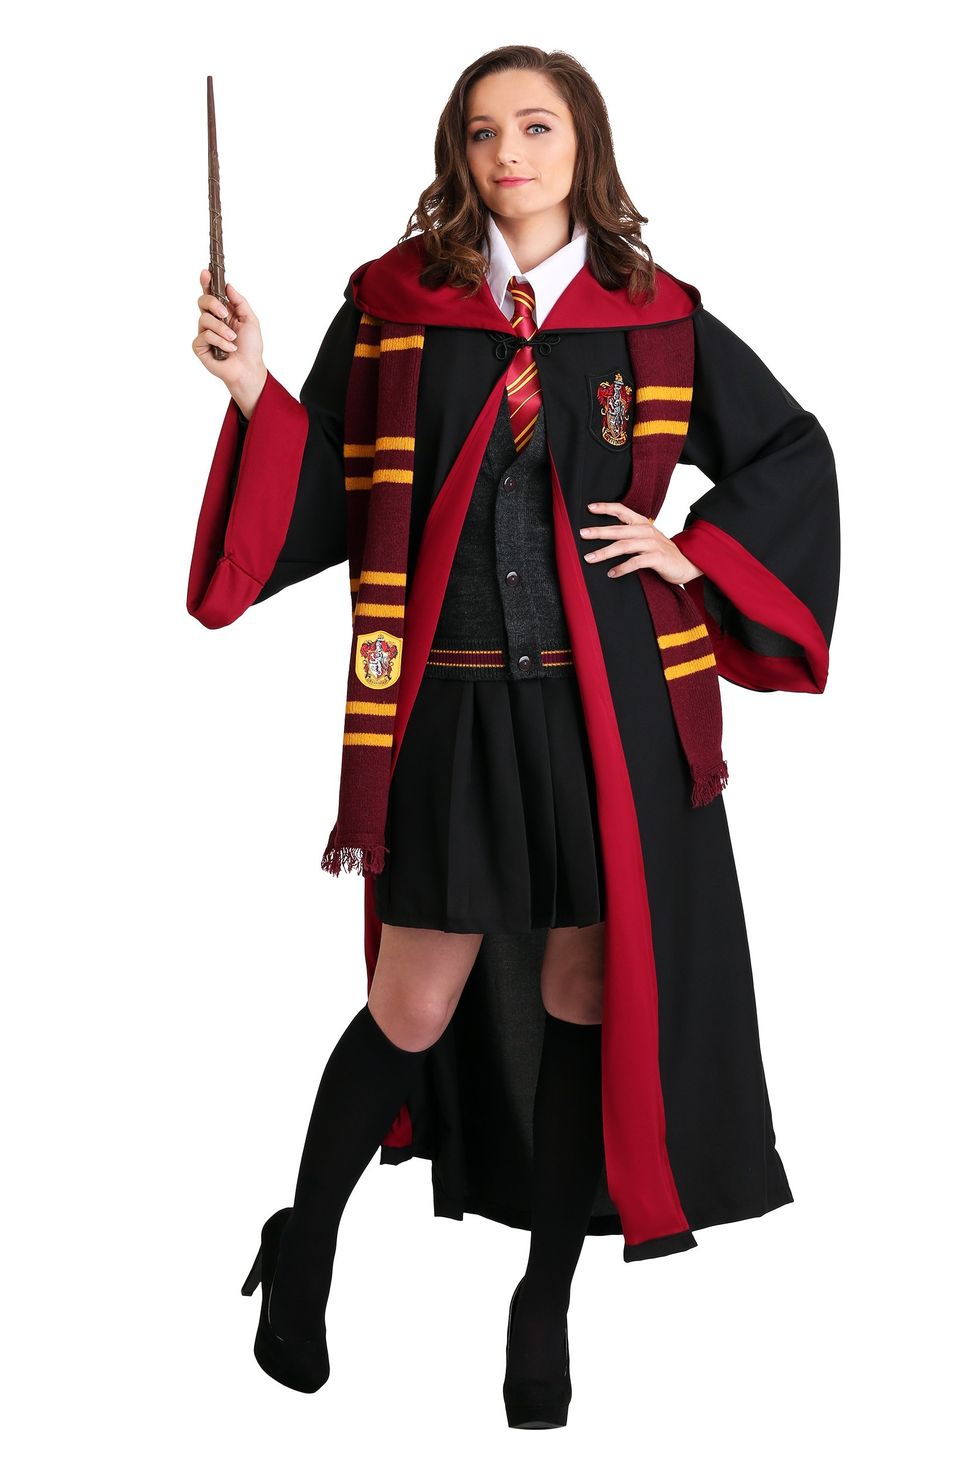 Best Harry Potter Slytherin Costume, Cosplay, Halloween Guide